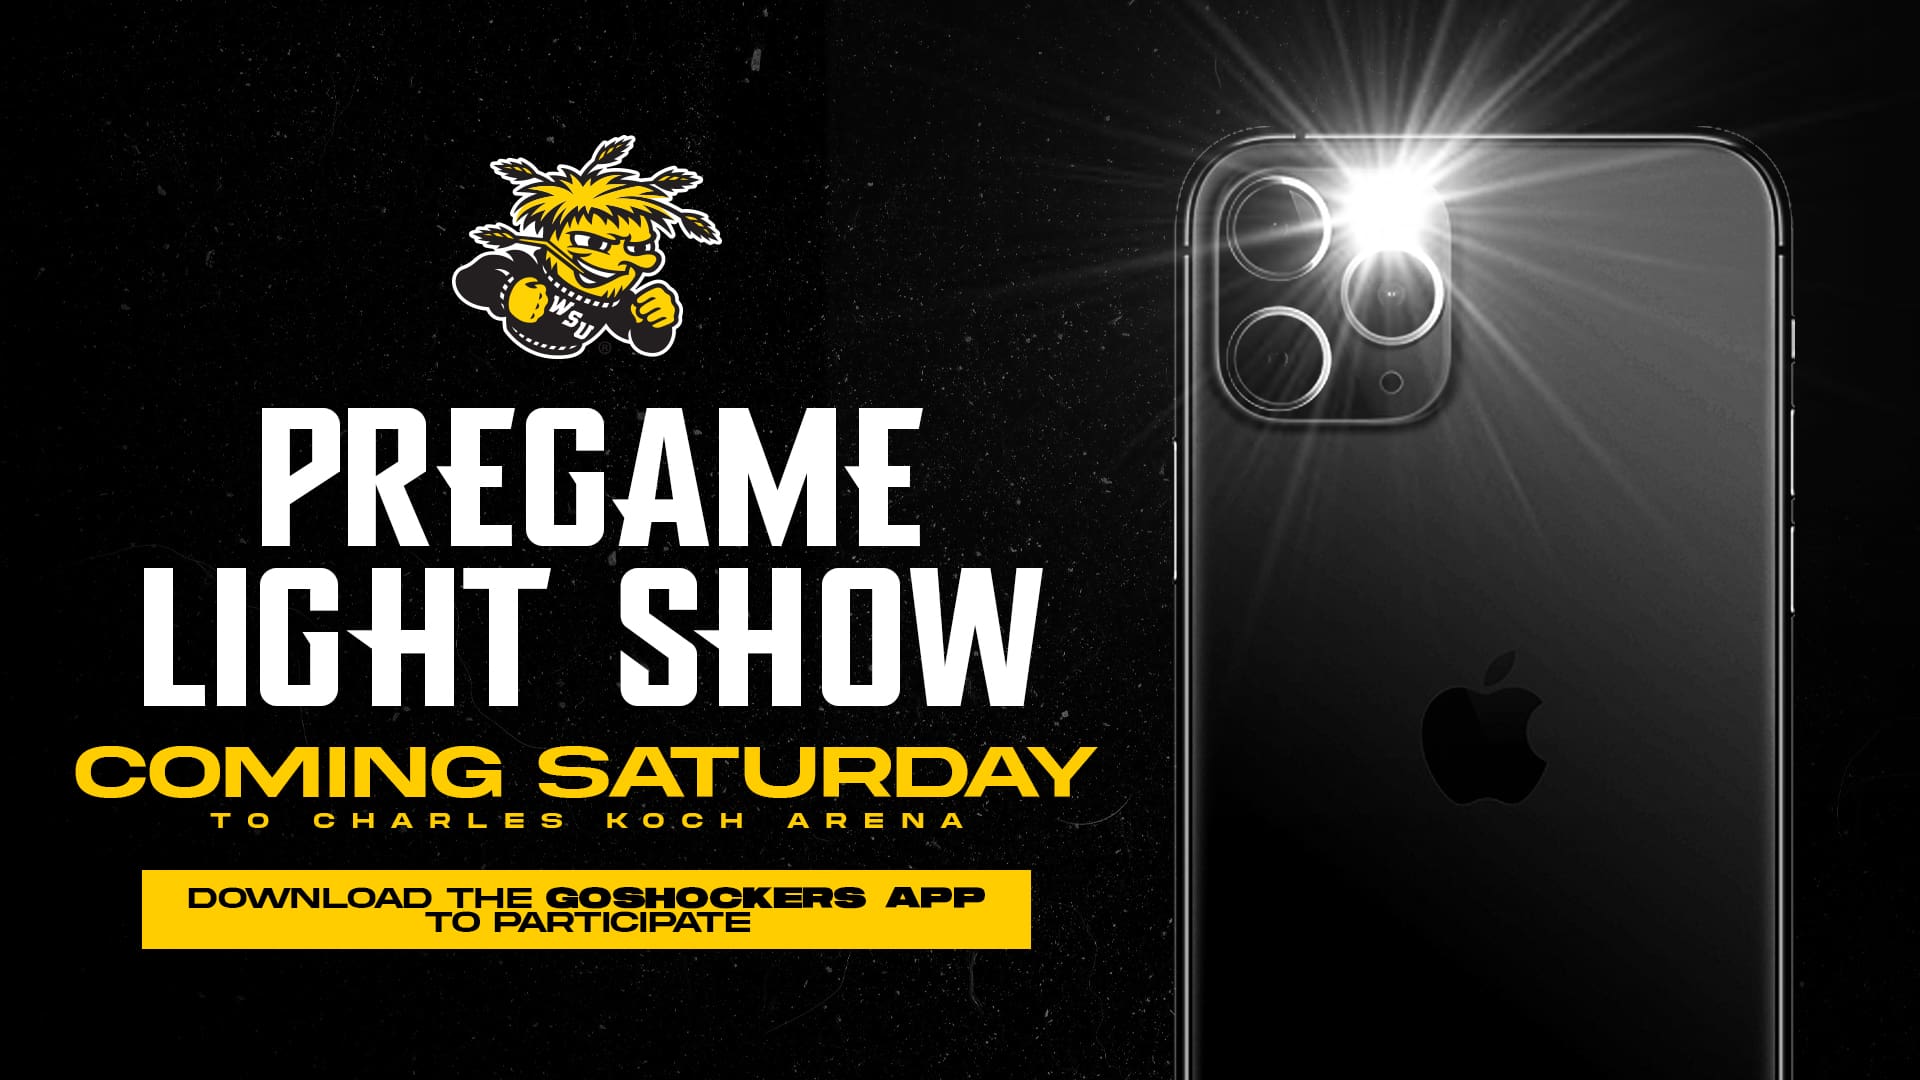 Pregame light show coming Saturday to Charles Koch Arena; Download the GoShockers App to participate